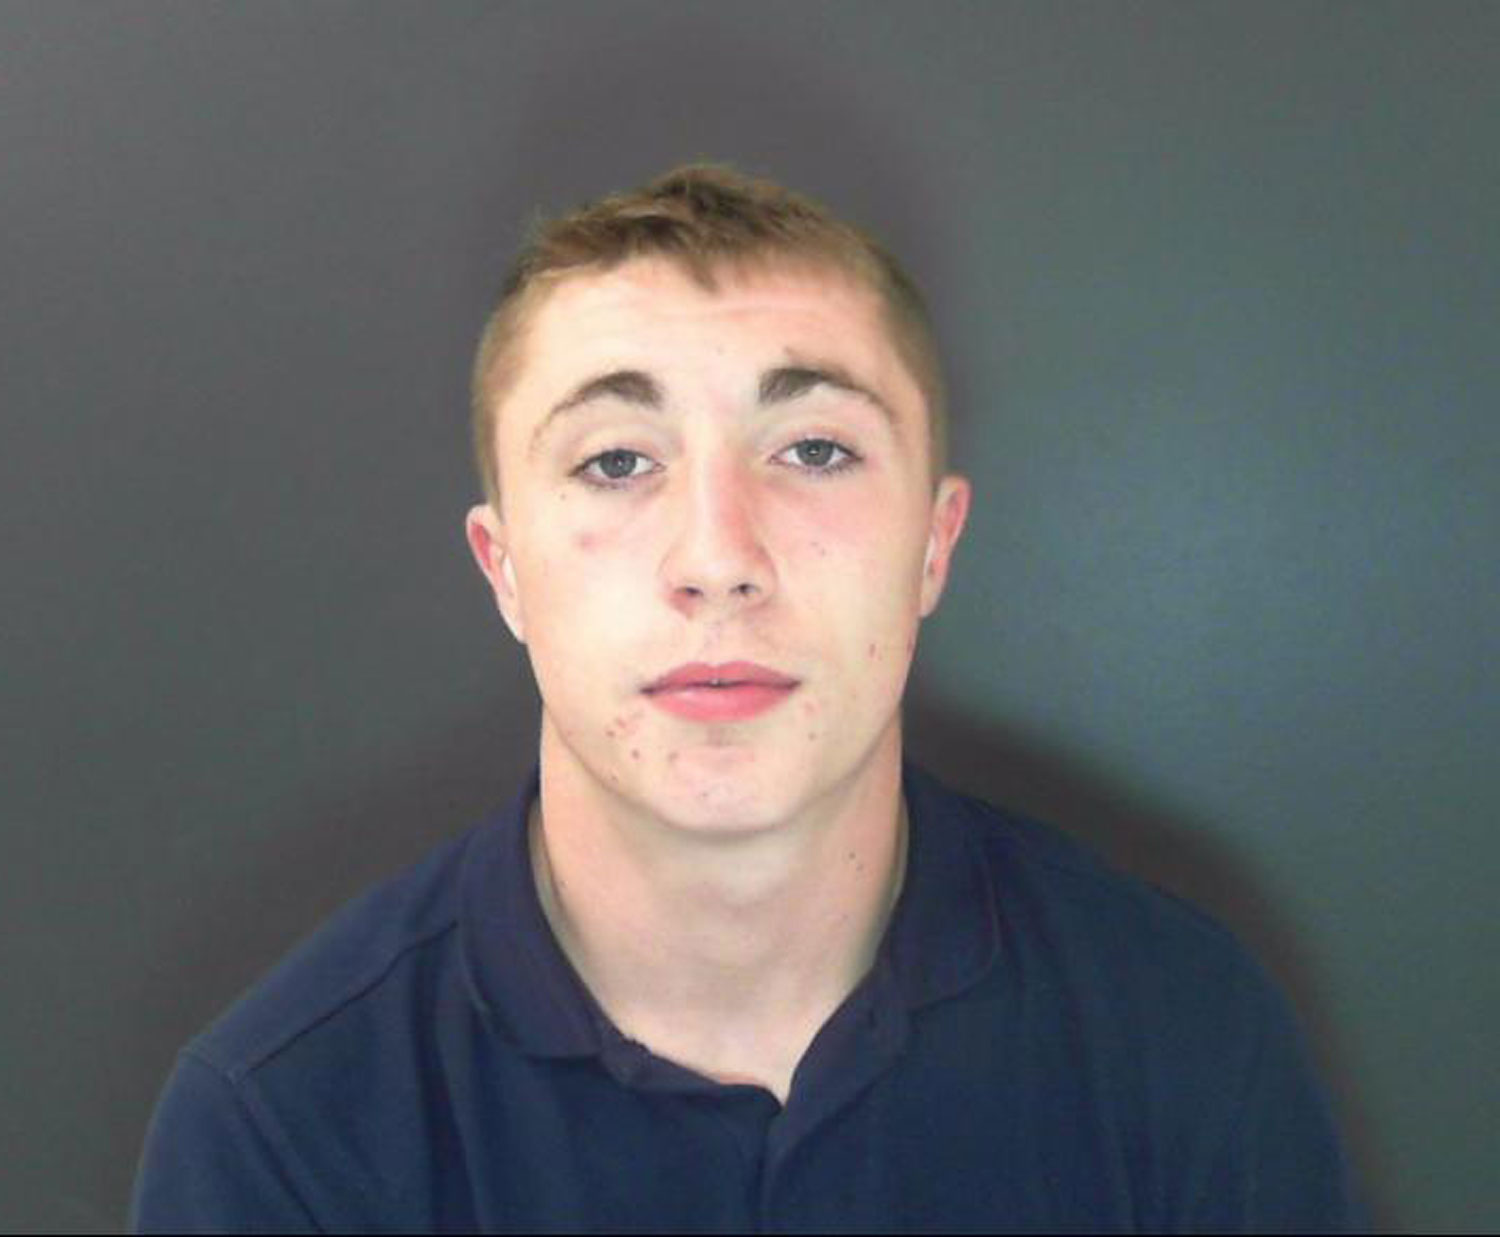 21-year-old Jack Alfie James Marshall is wanted in connection with an offence of aggravated vehicle taking